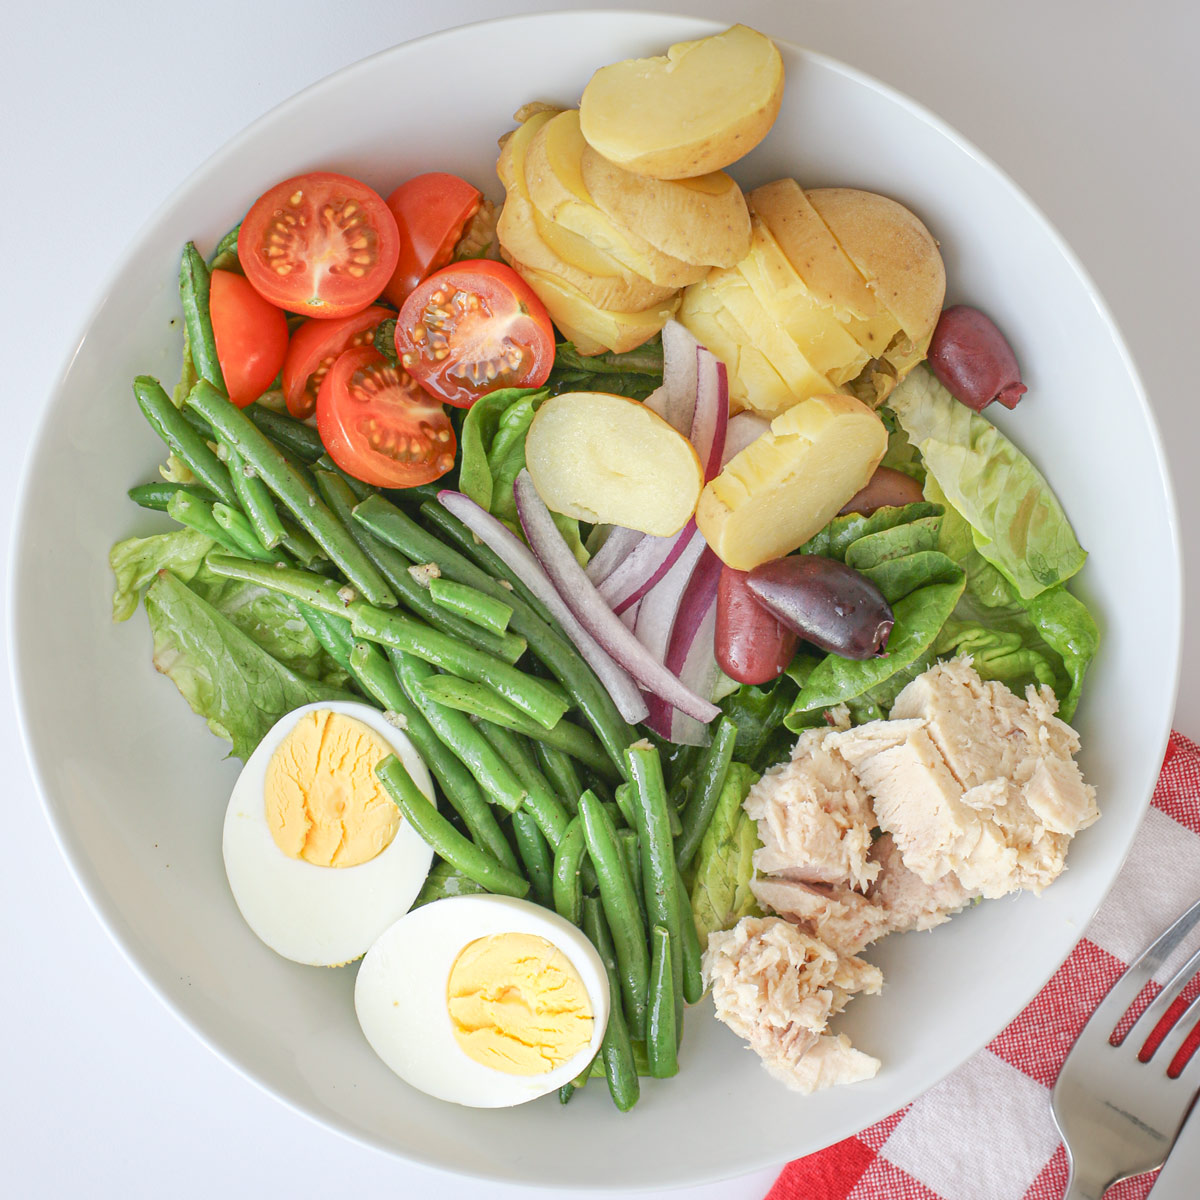 nicoise salad with green beans in a white bowl with red checked napkin.